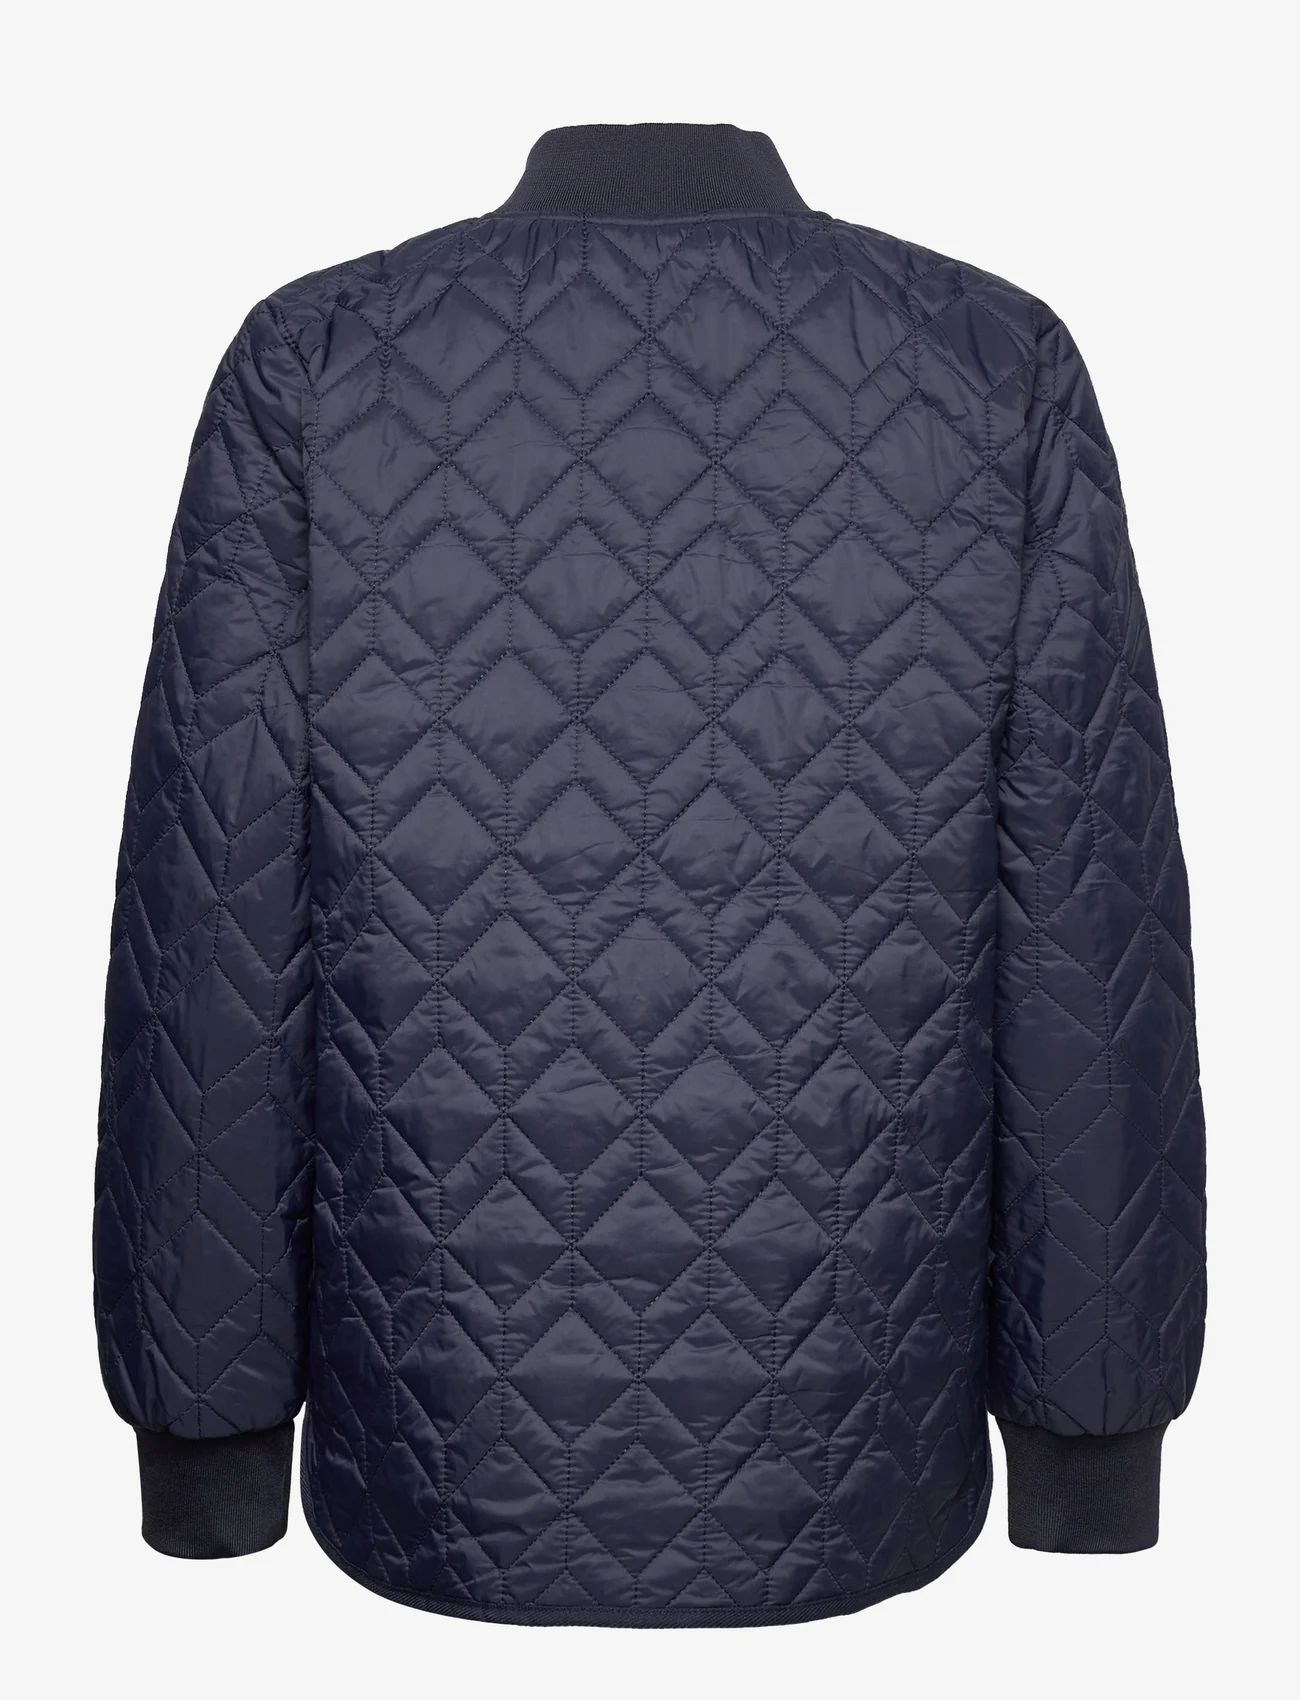 Esprit Collection - Quilted jacket with rib knit collar - frühlingsjacken - navy - 1